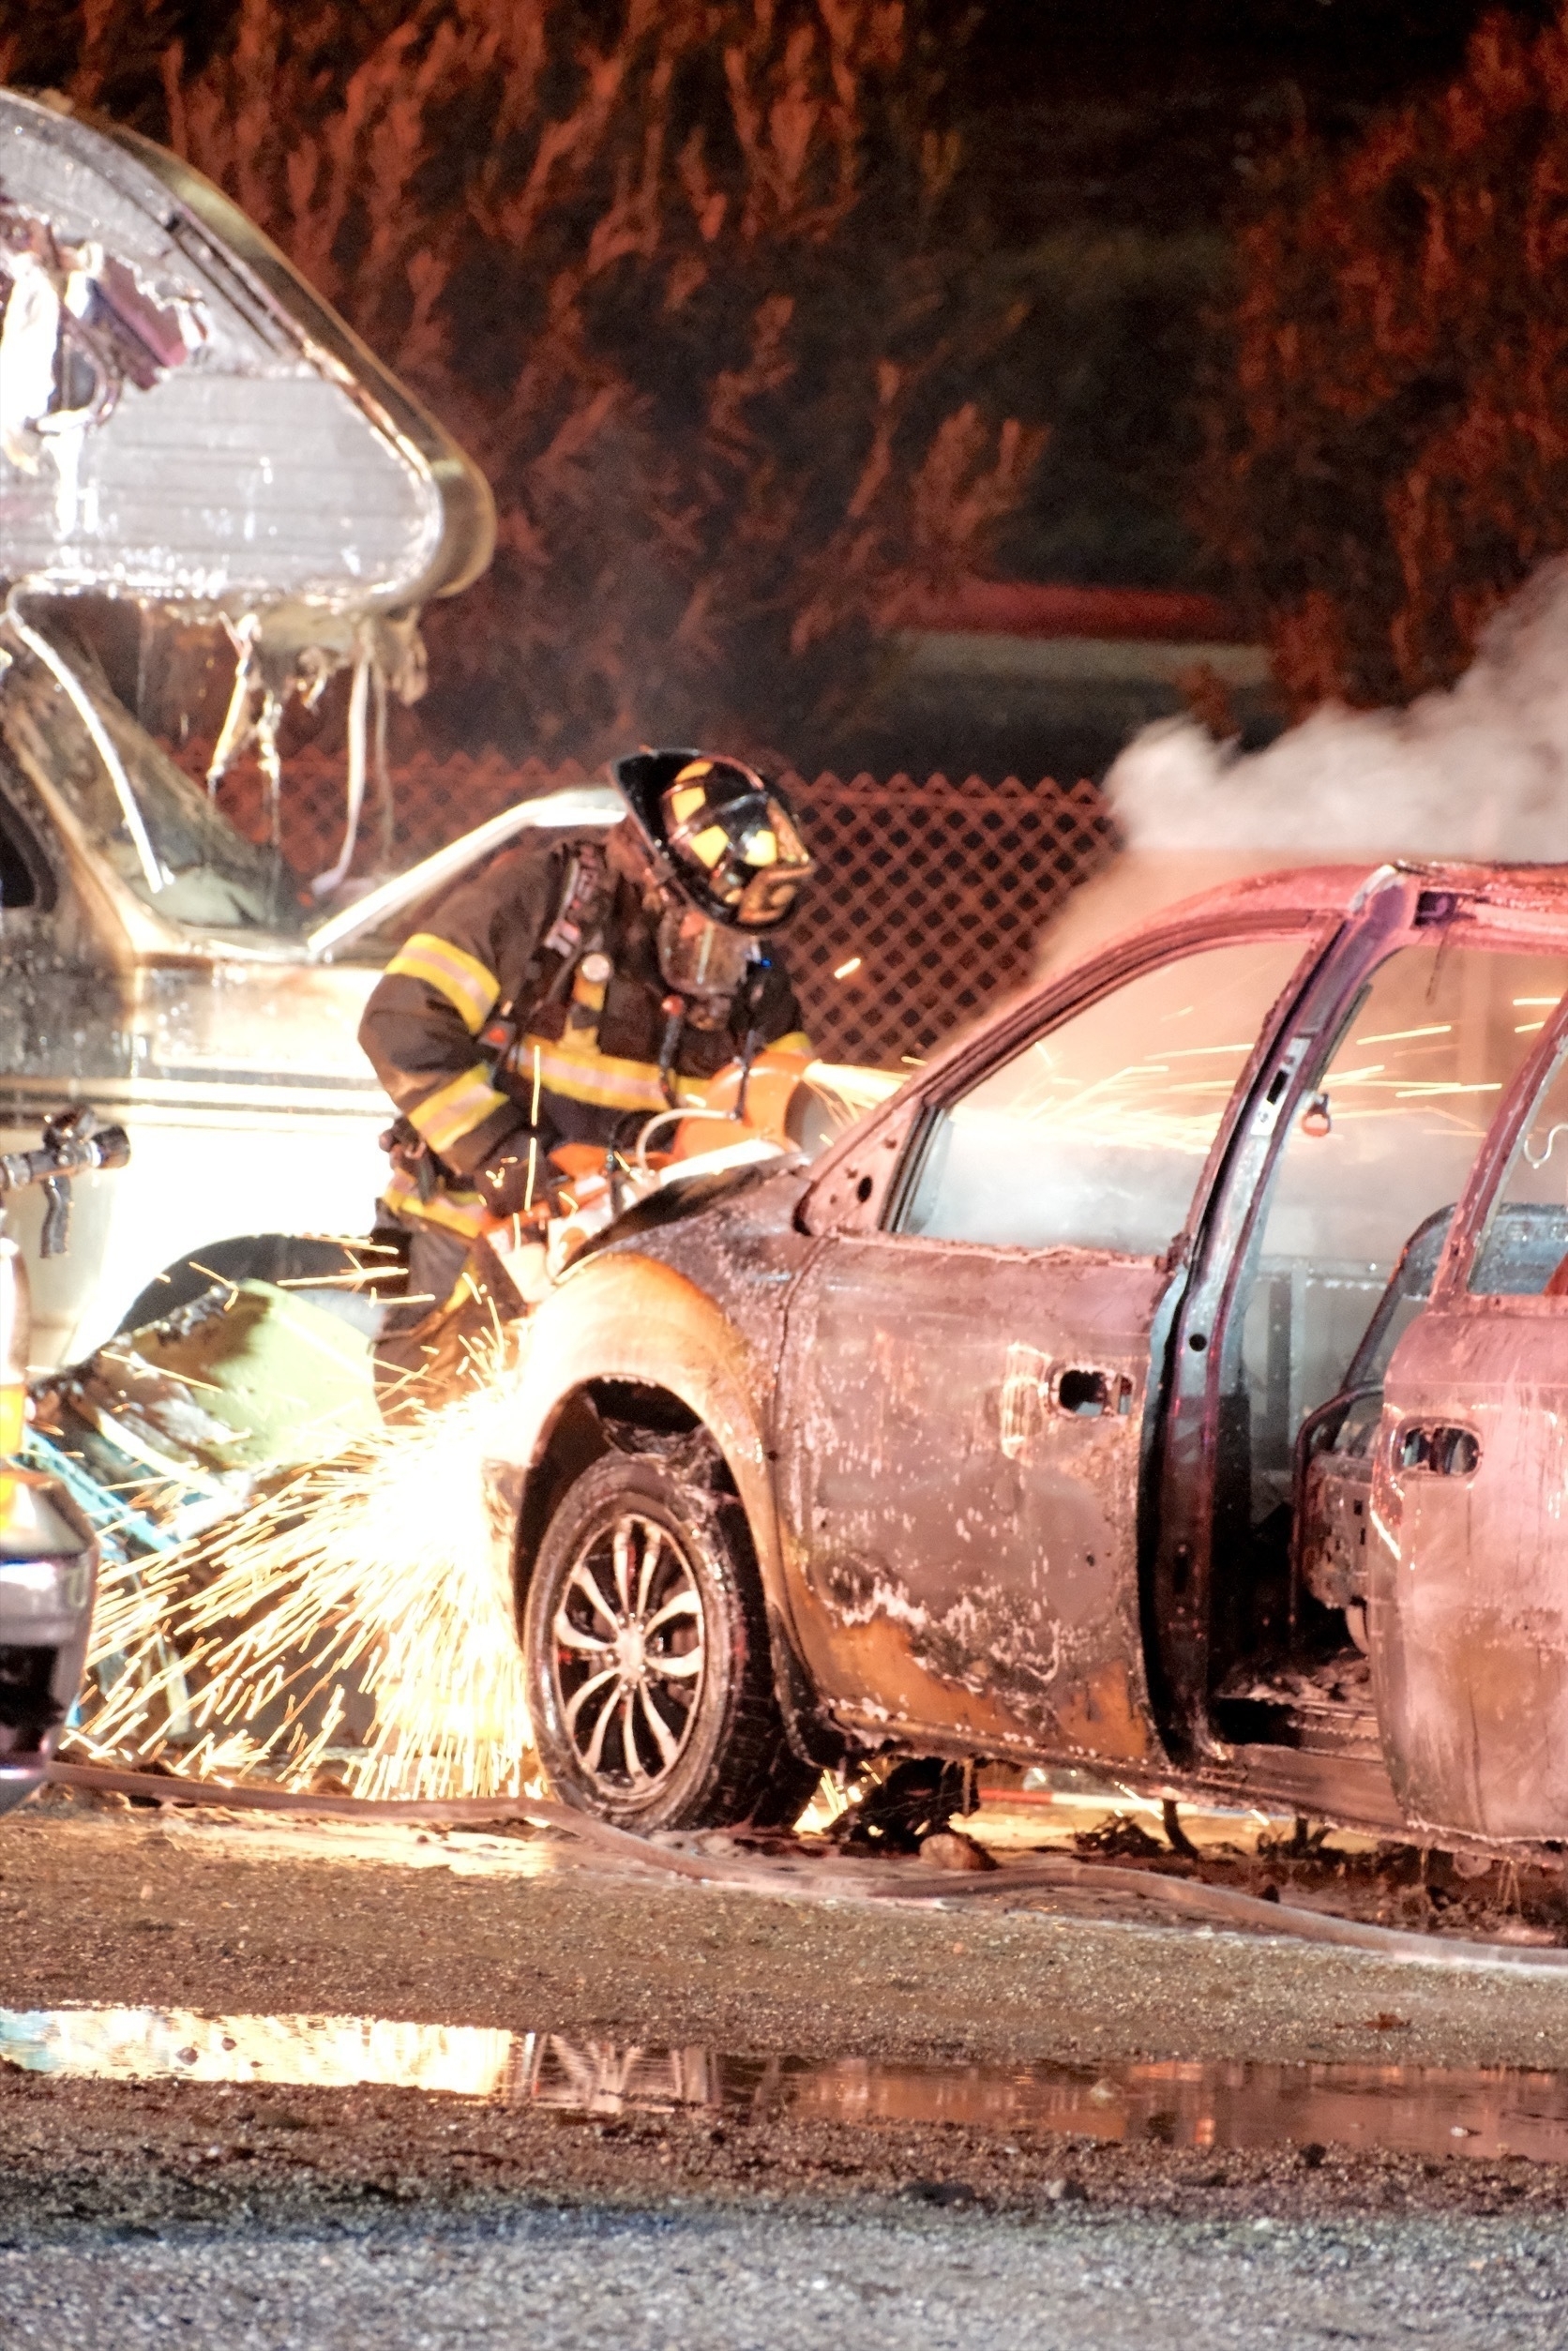 Sparks fly as a fire fighter cuts open the hood in efforts to make the burning vehicle safe.